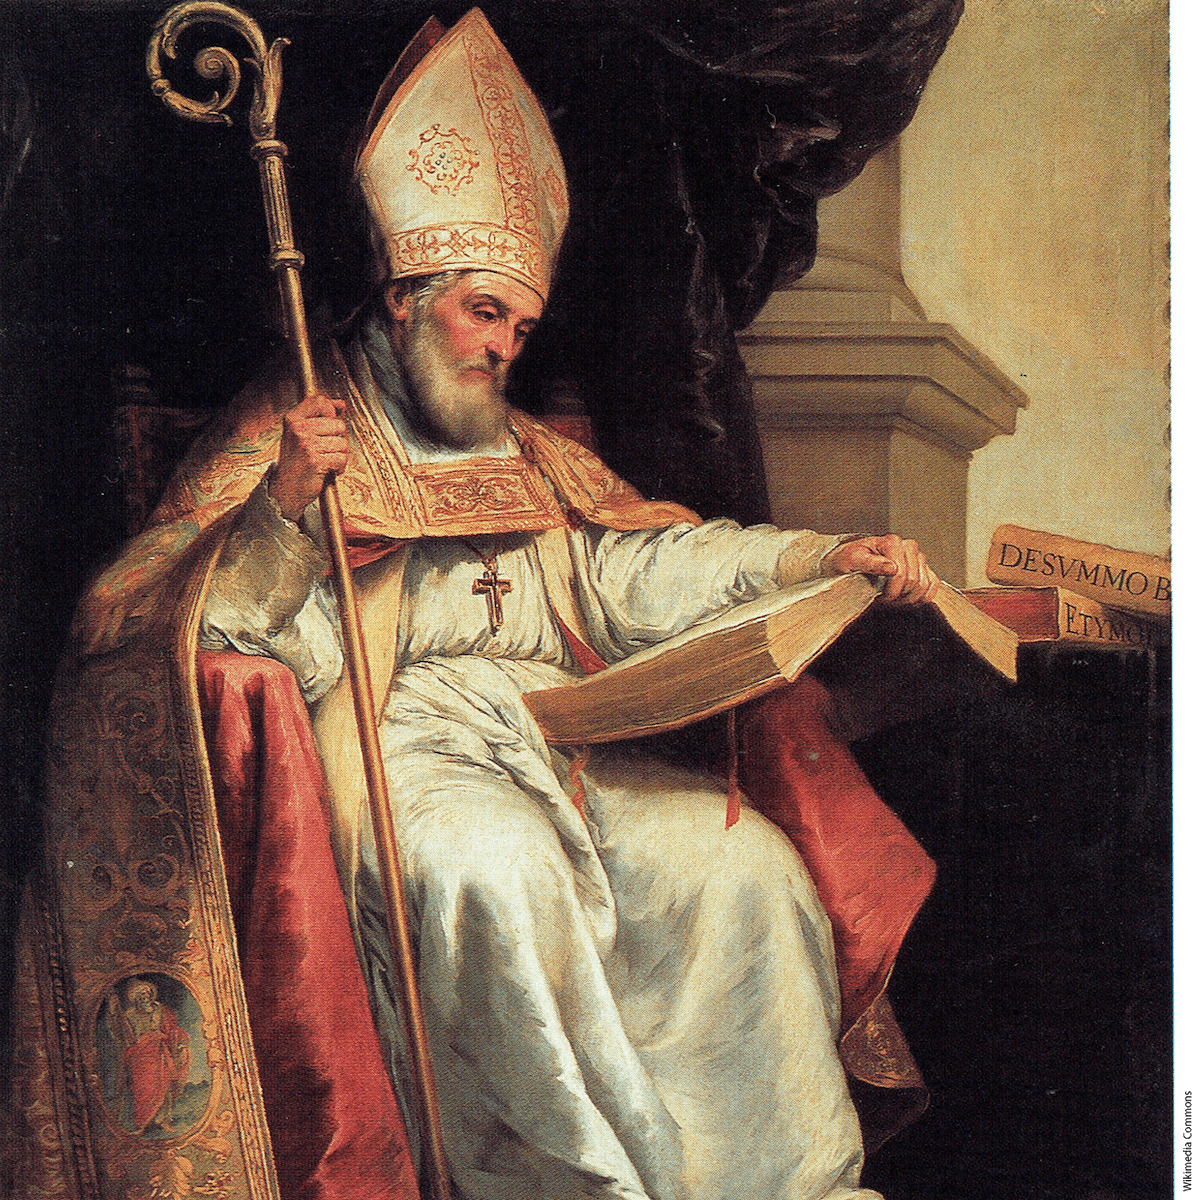 St. Isidore of Seville, as seen in a painting by Bartolomé Esteban Murillo, on display in the Seville Cathedral.